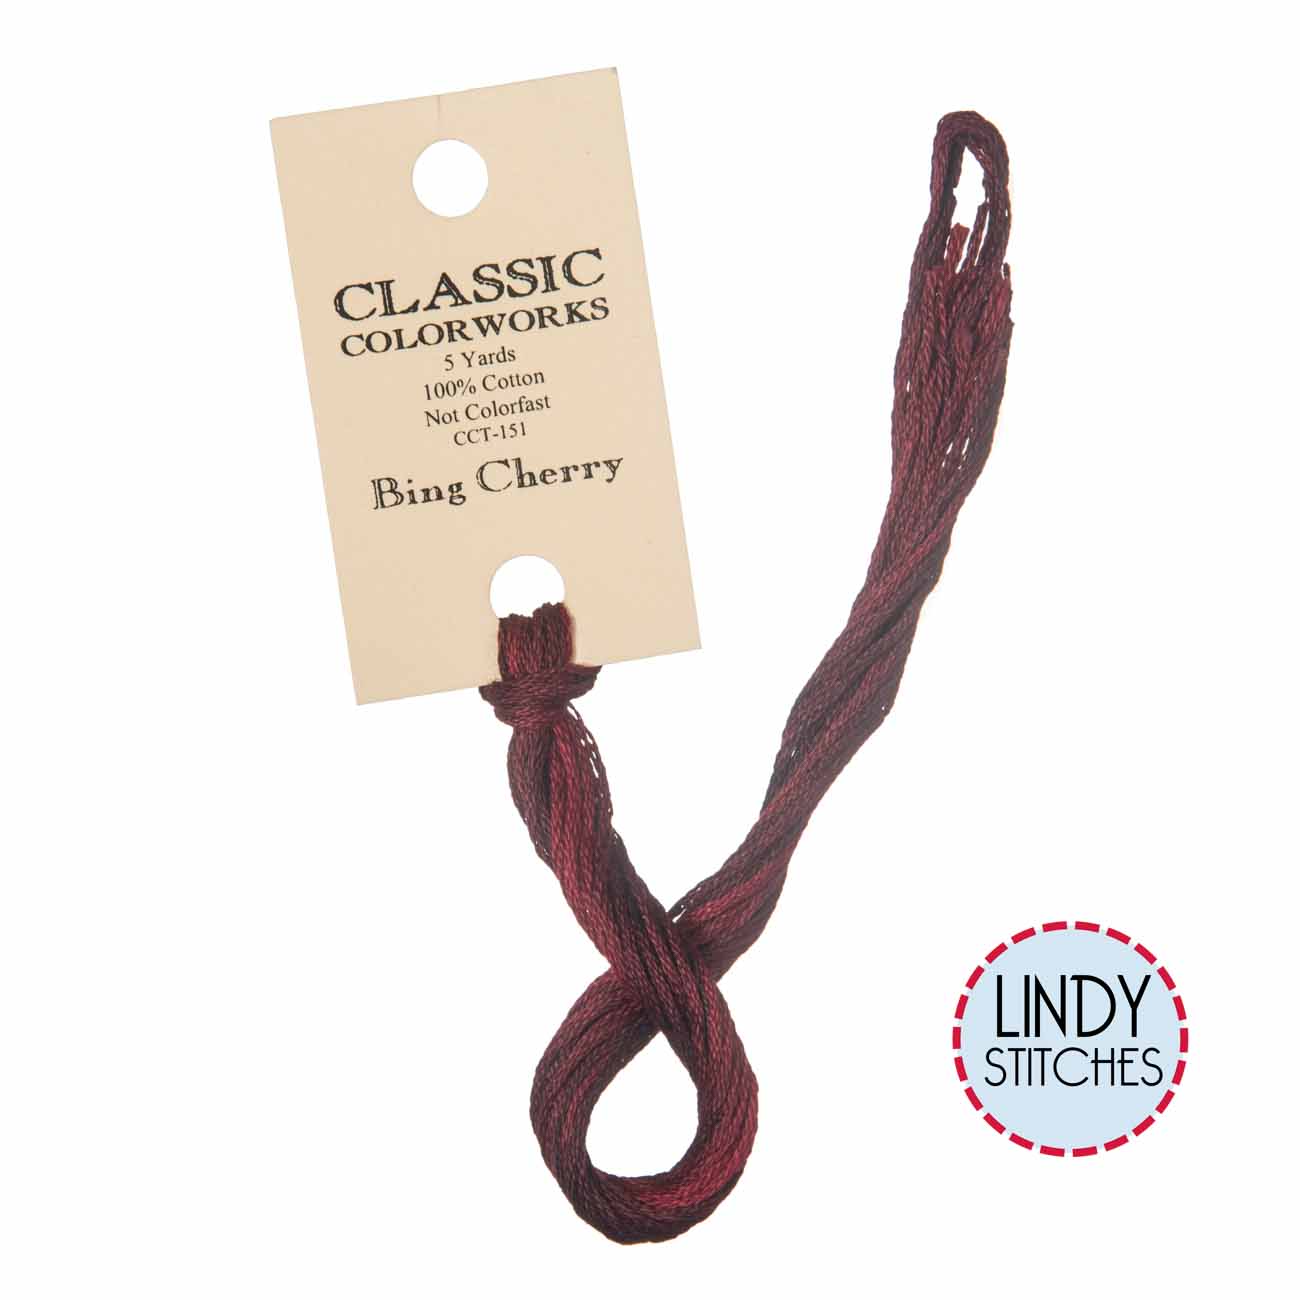 Bing Cherry Classic Colorworks Floss Hand Dyed Cotton Skein